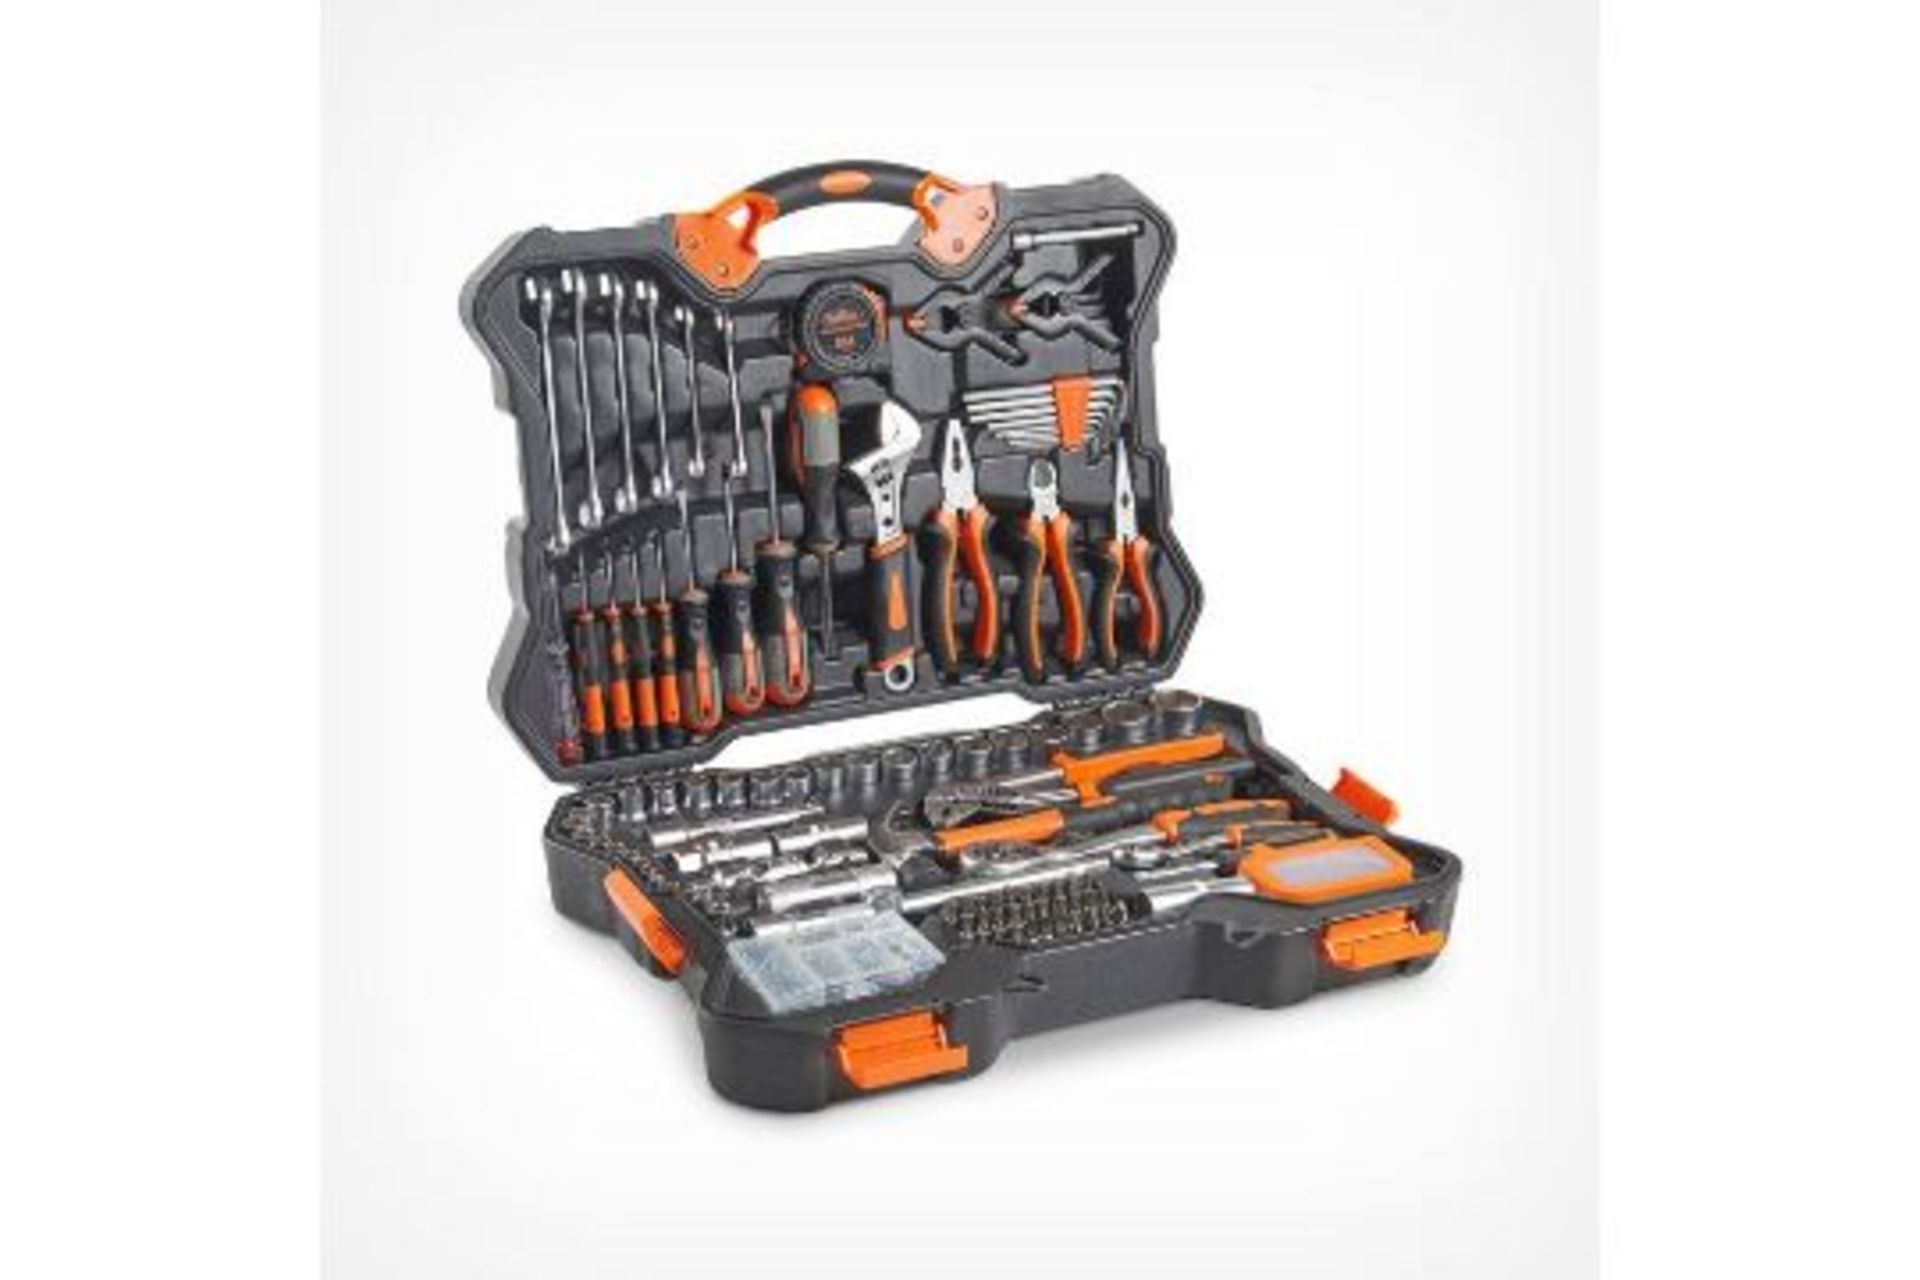 256pc Premium Tool & Socket Set. Ideal for simple home maintenance as well as larger DIY